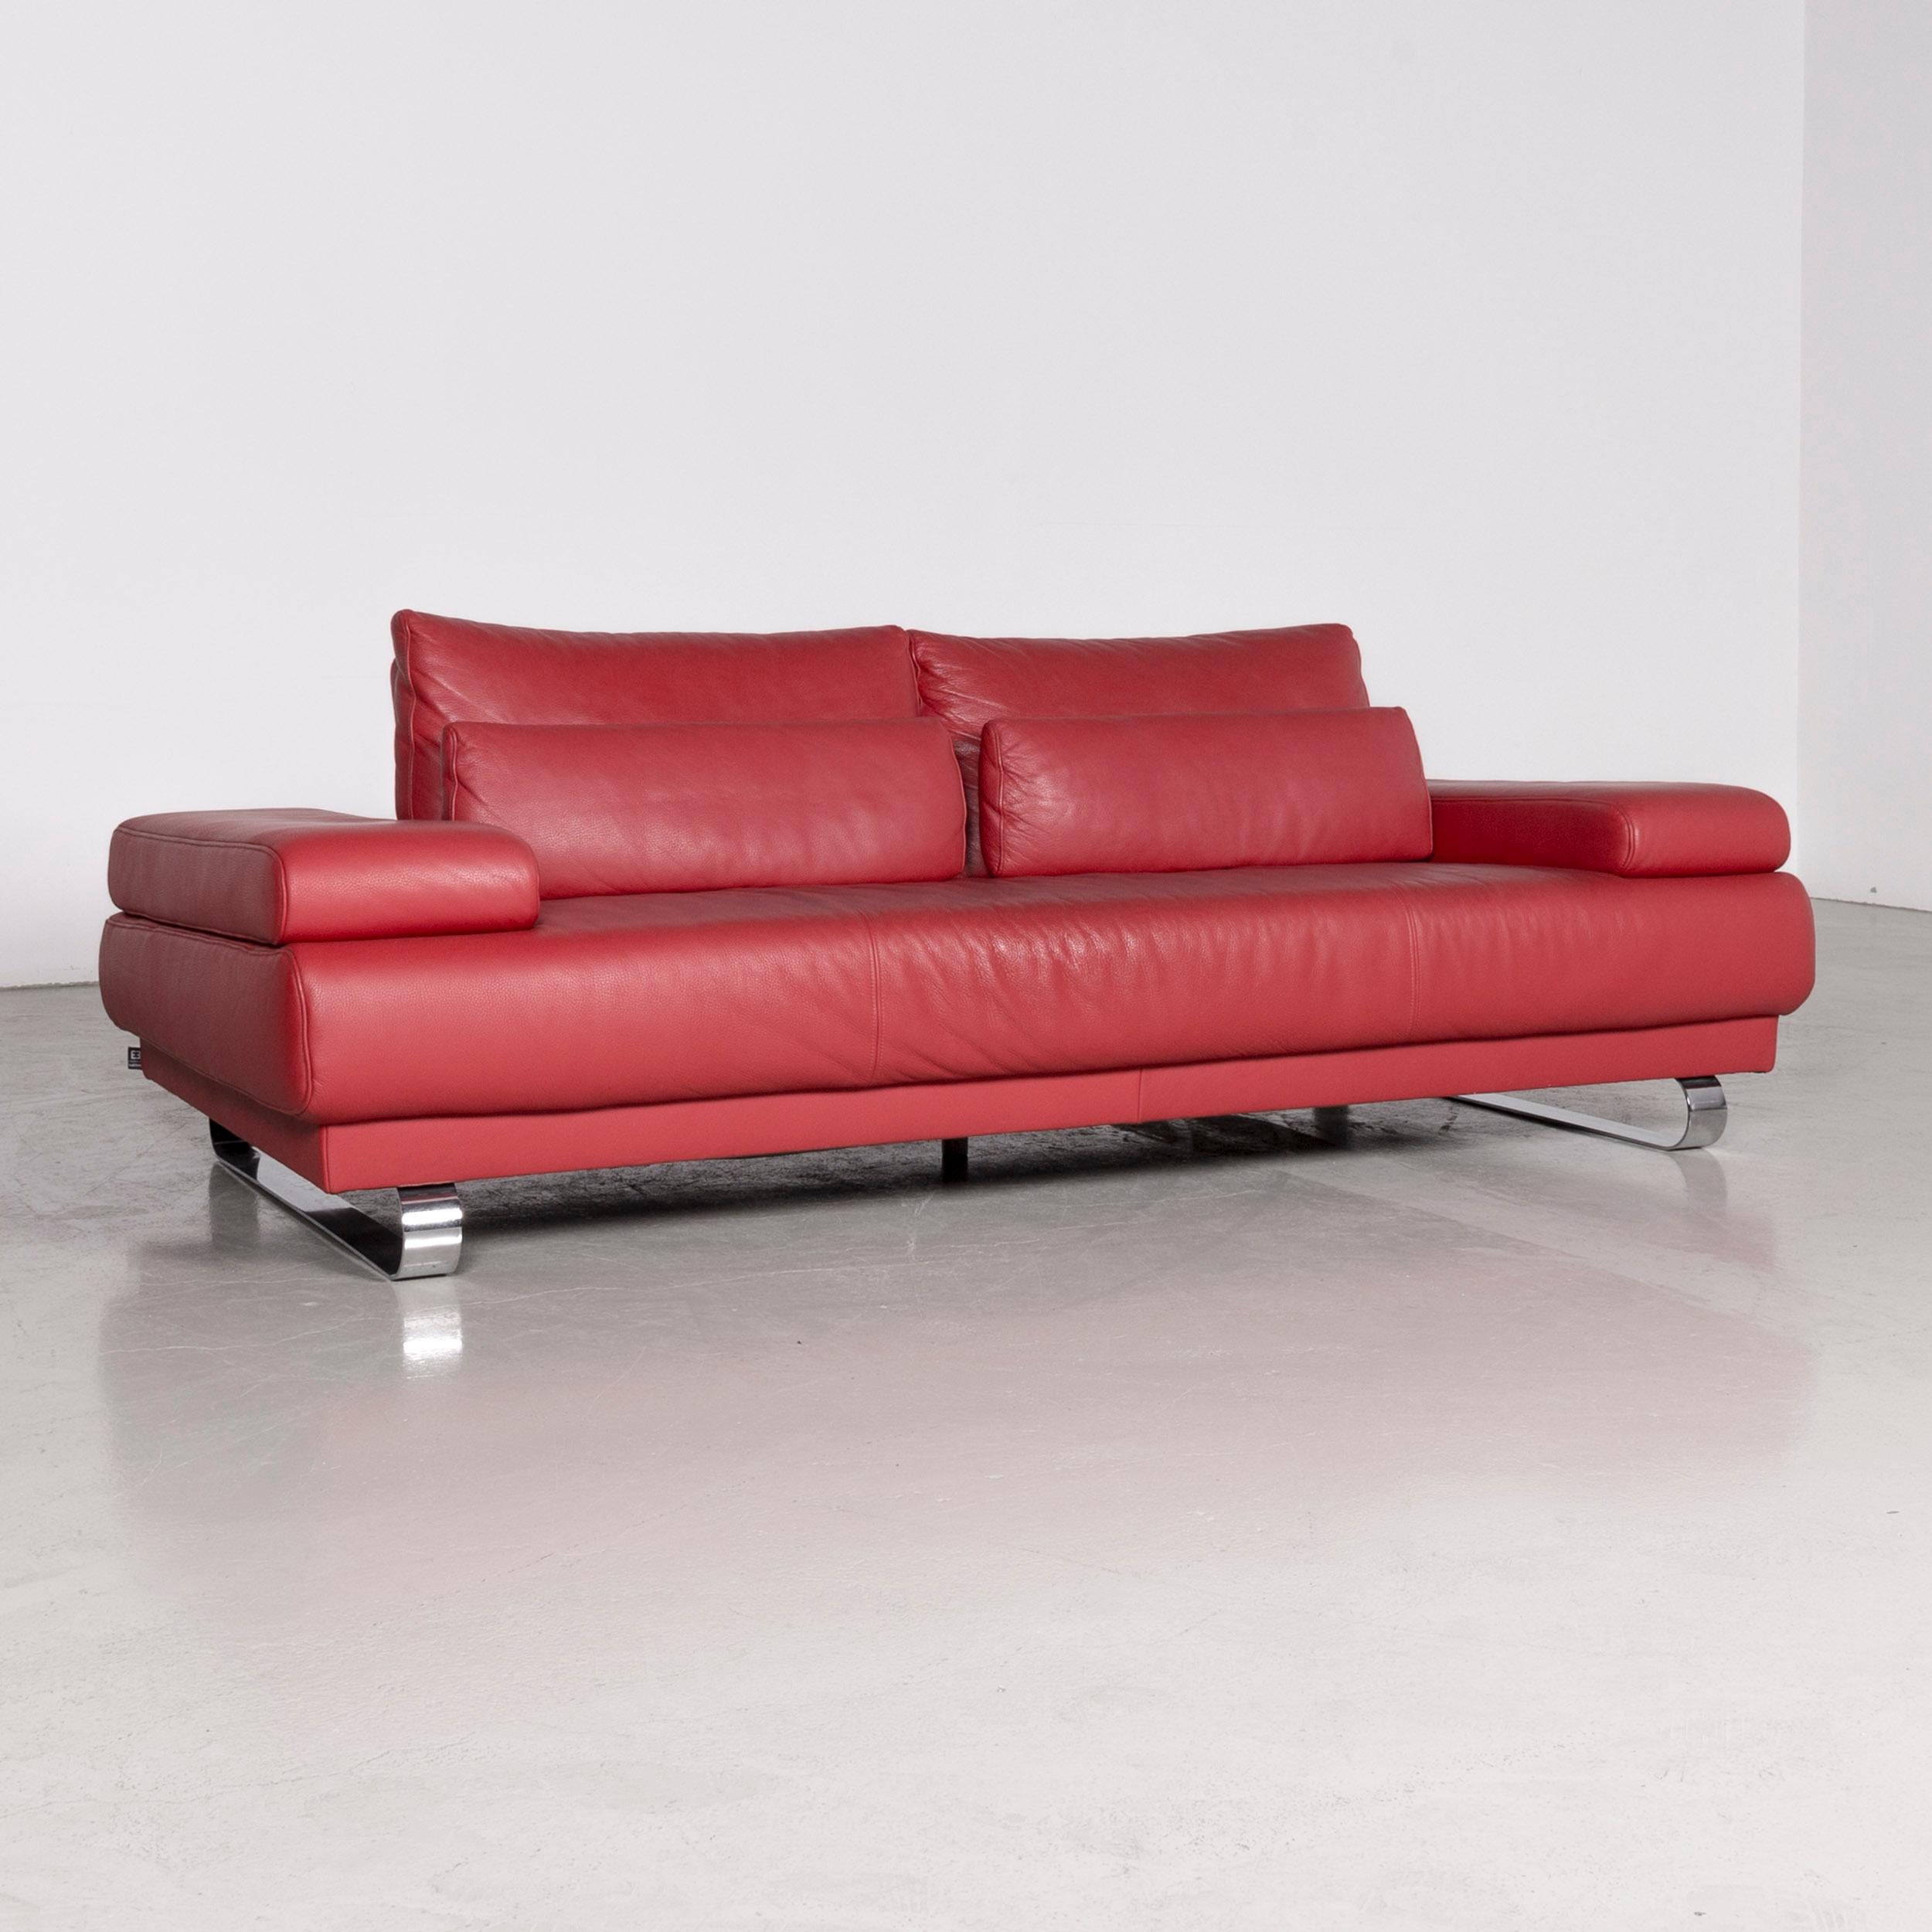 German Ewald Schillig Harry Designer Sofa Leather Red Three-Seat Couch For Sale